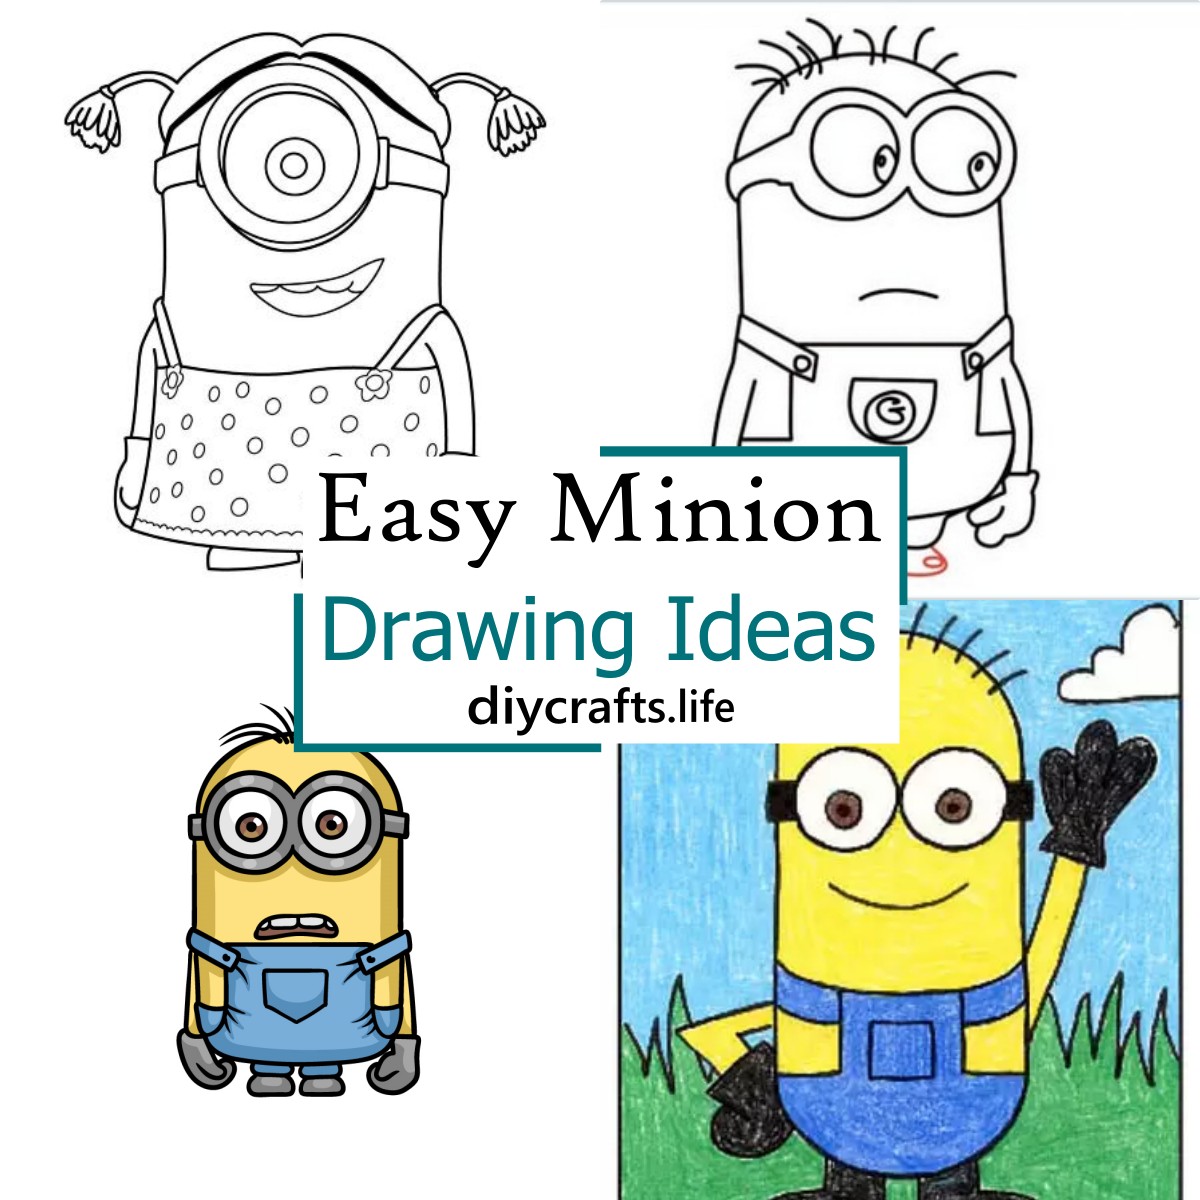 How to Draw a Minion - Easy Drawing Tutorial For Kids